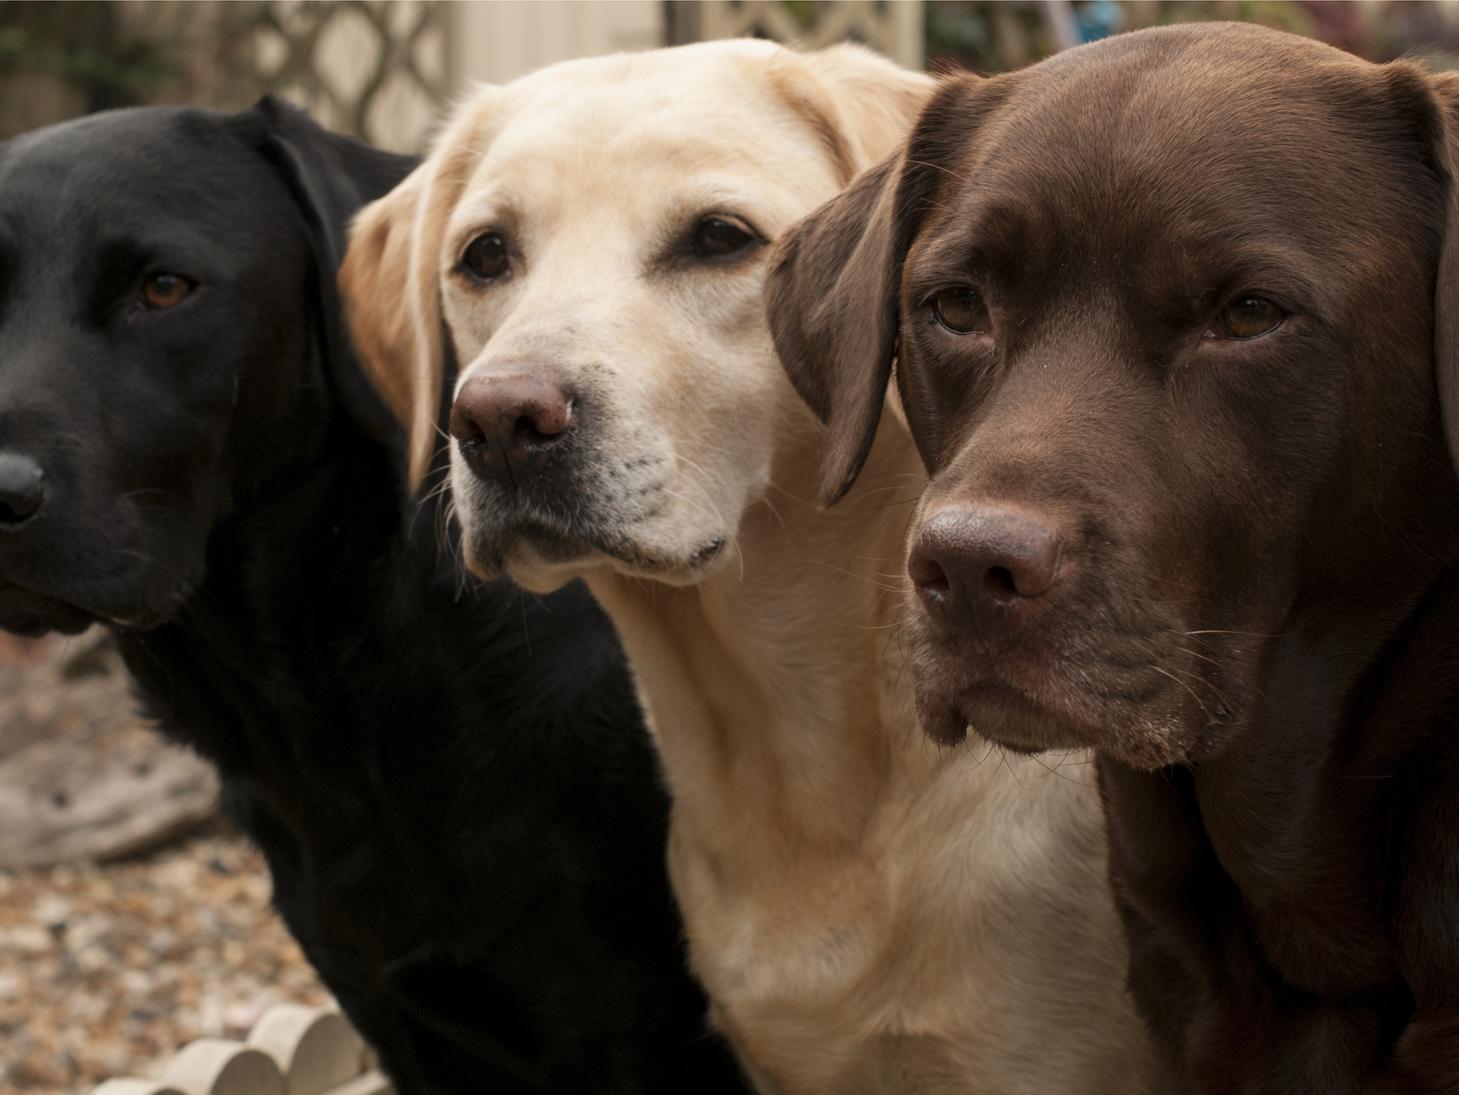 The beloved Labrador takes the fourth spot